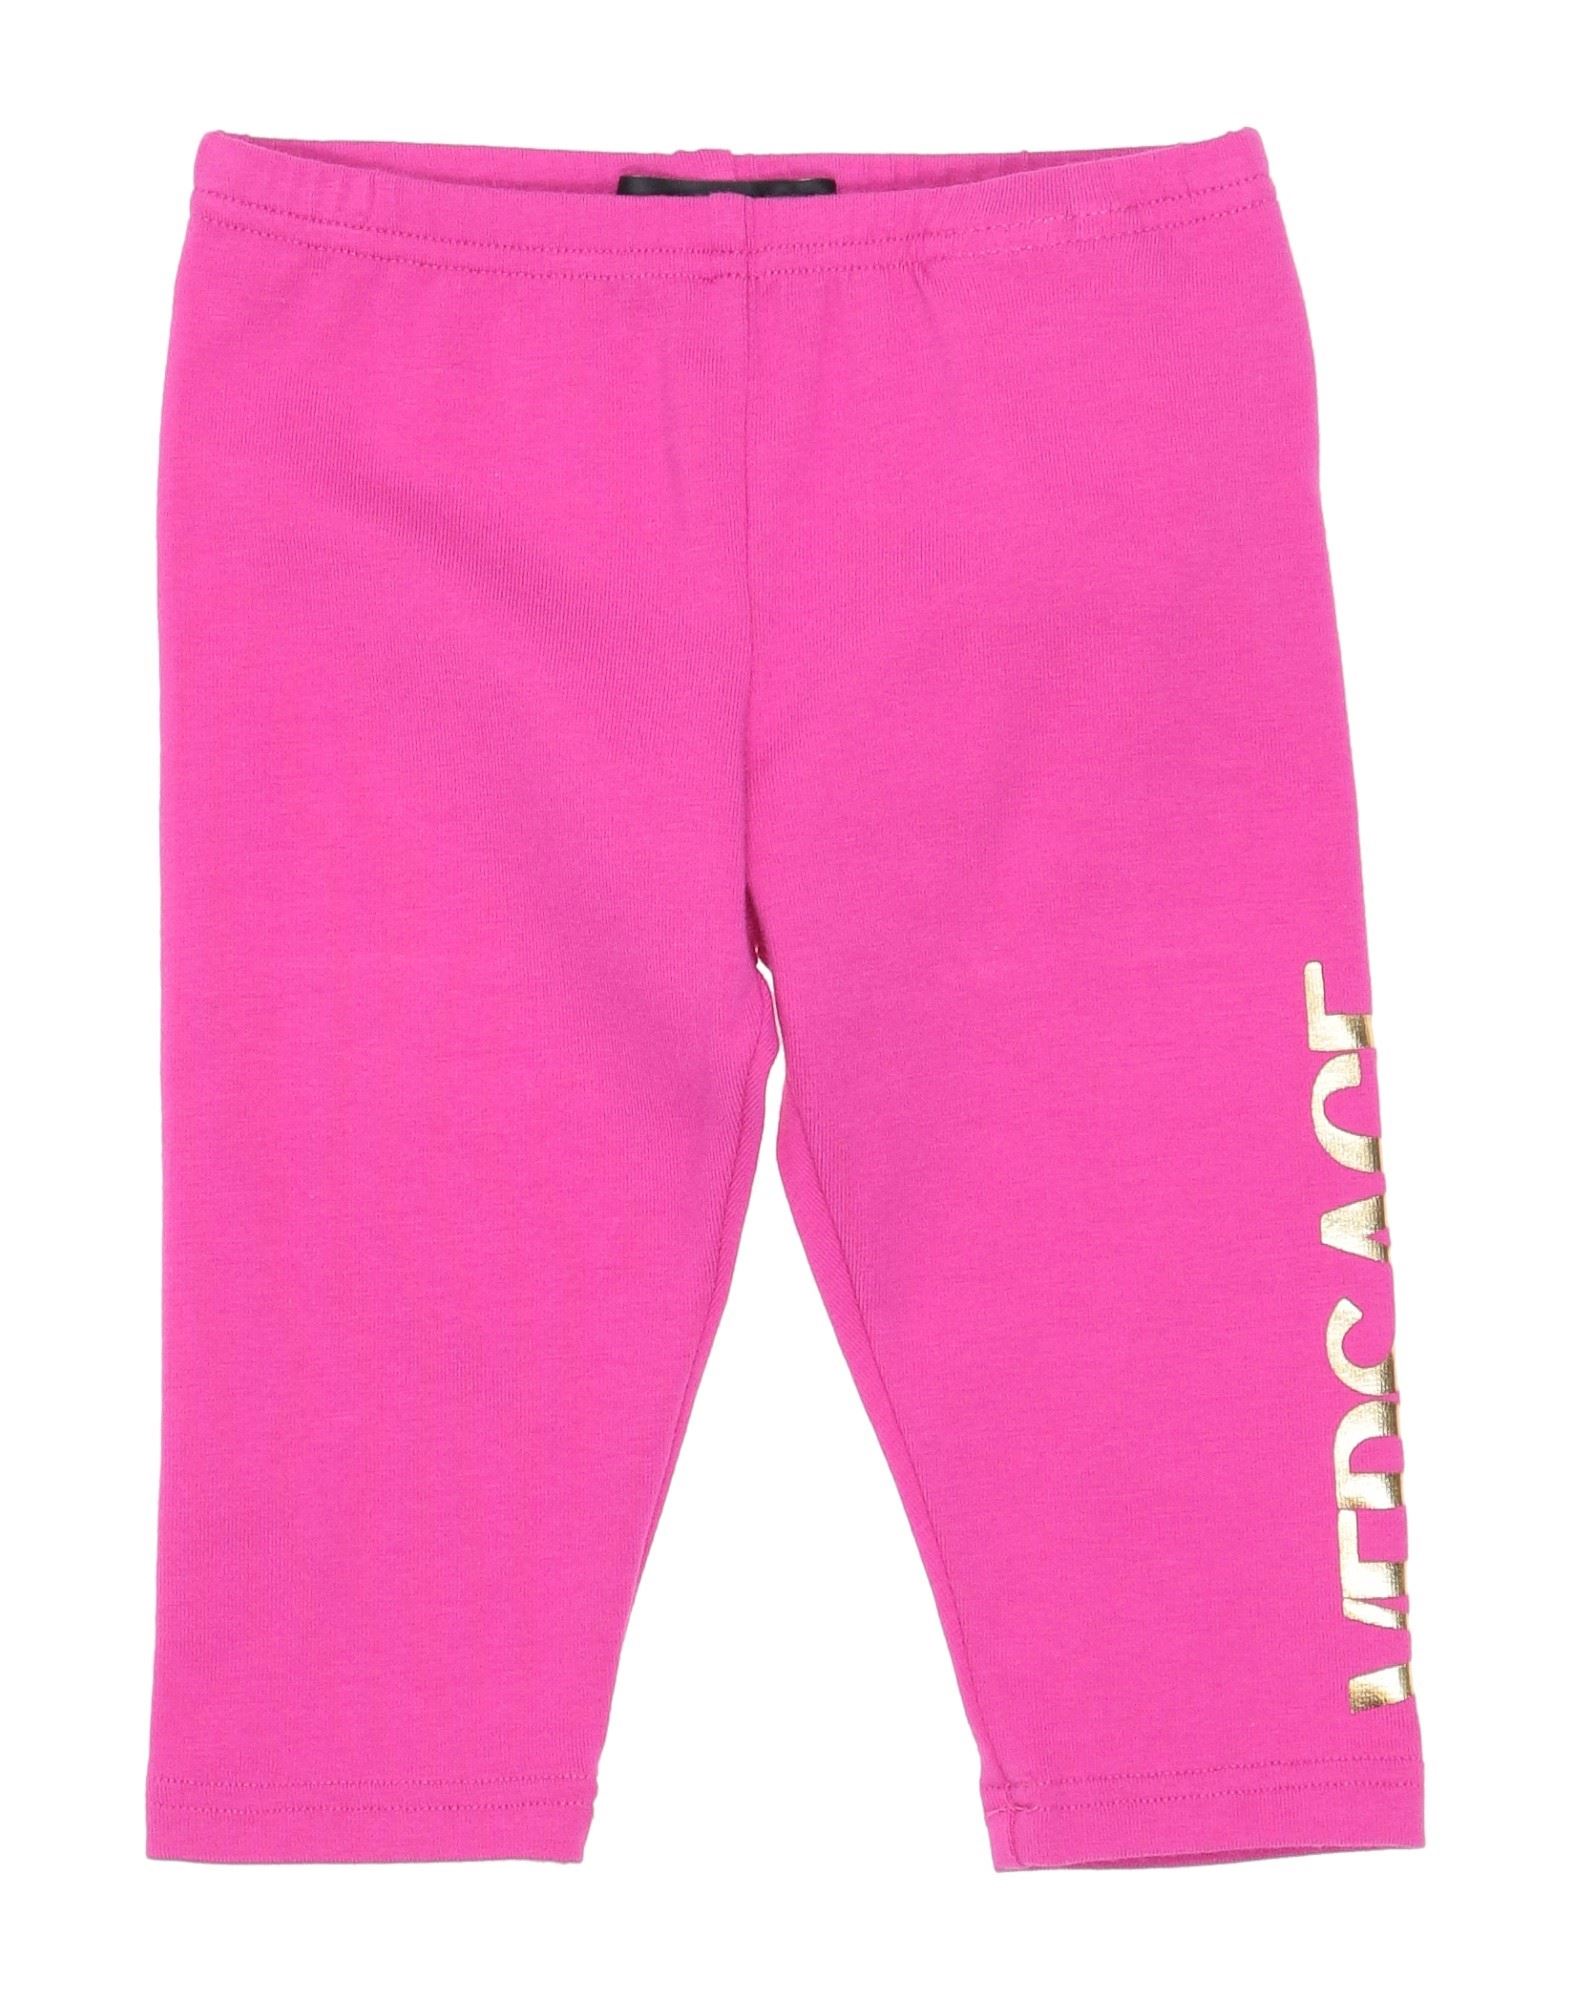 VERSACE YOUNG Leggings Kinder Fuchsia von VERSACE YOUNG